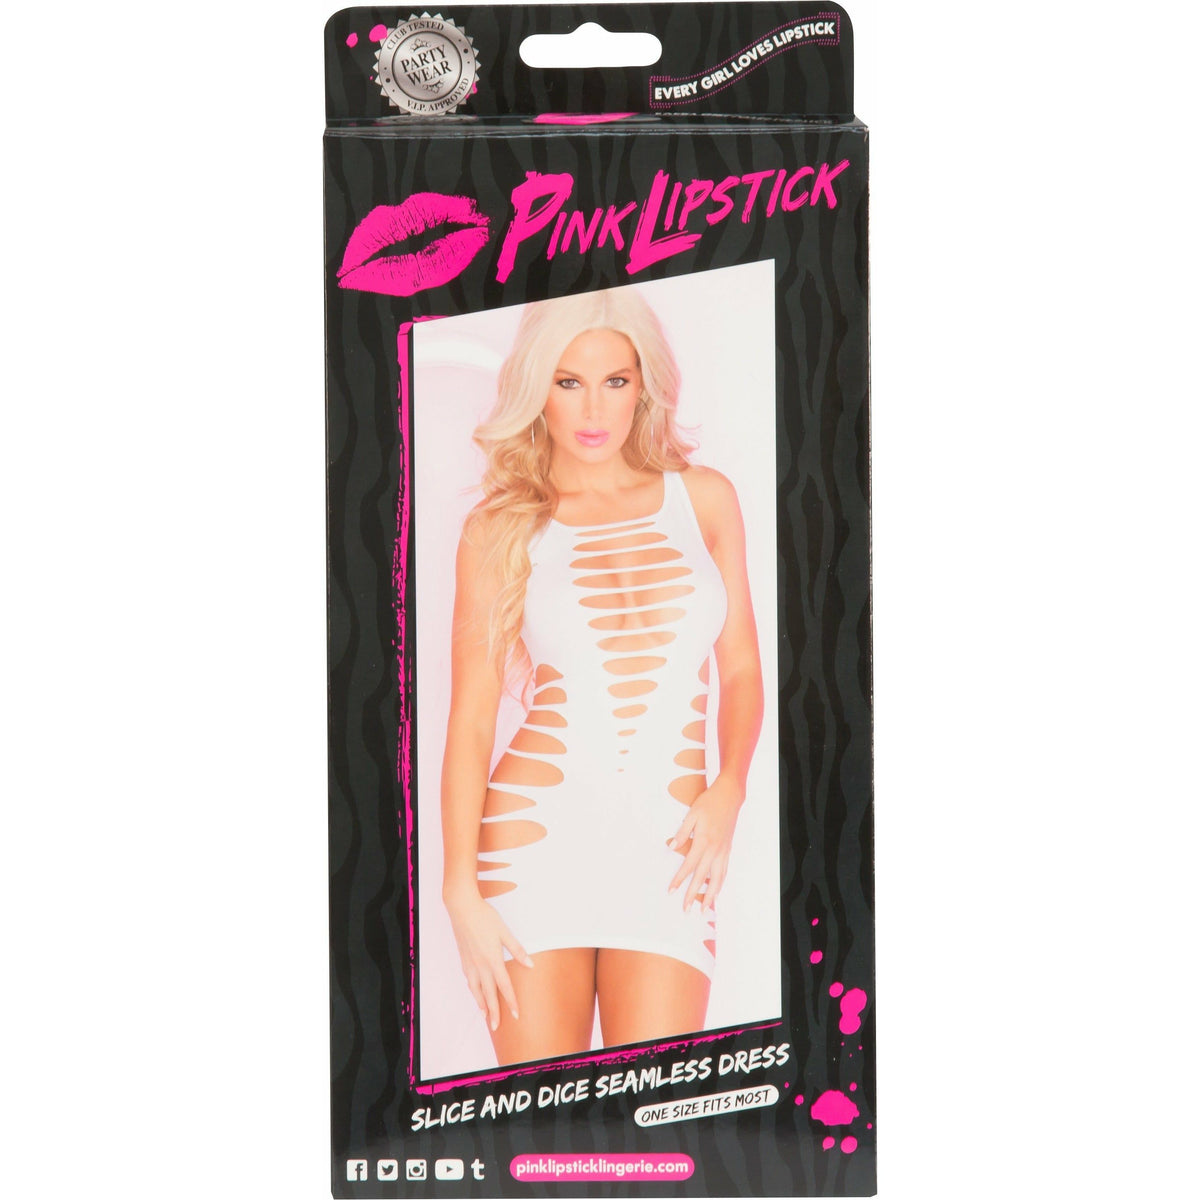 Pink Lipstick Slice and Dice Seamless Dress - White - One Size